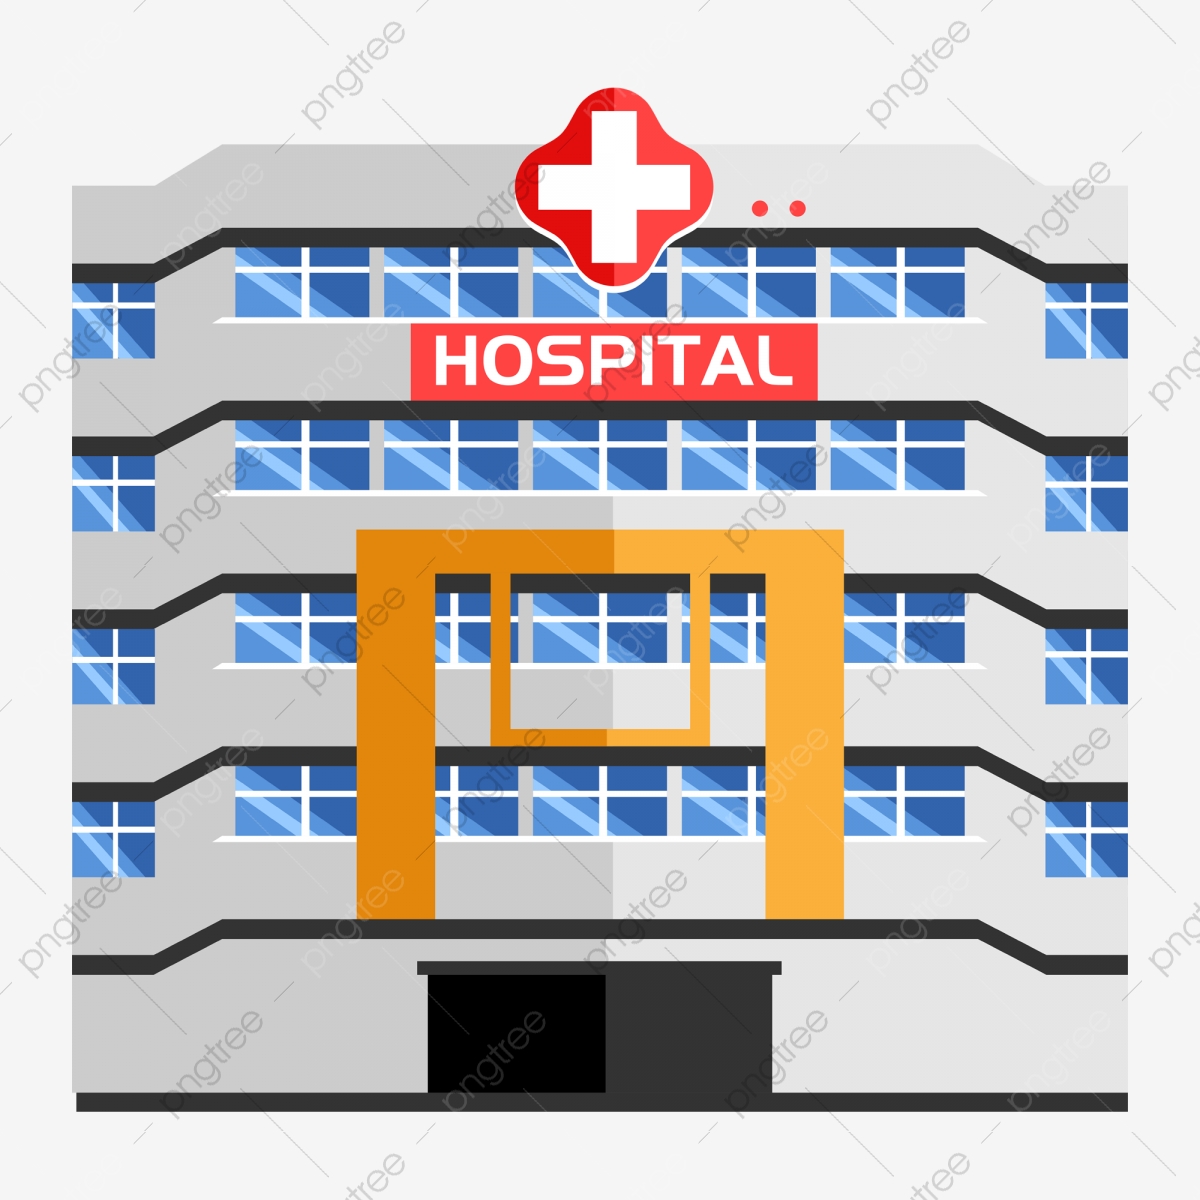 Hospital clipart simple, Hospital simple Transparent FREE for download ...